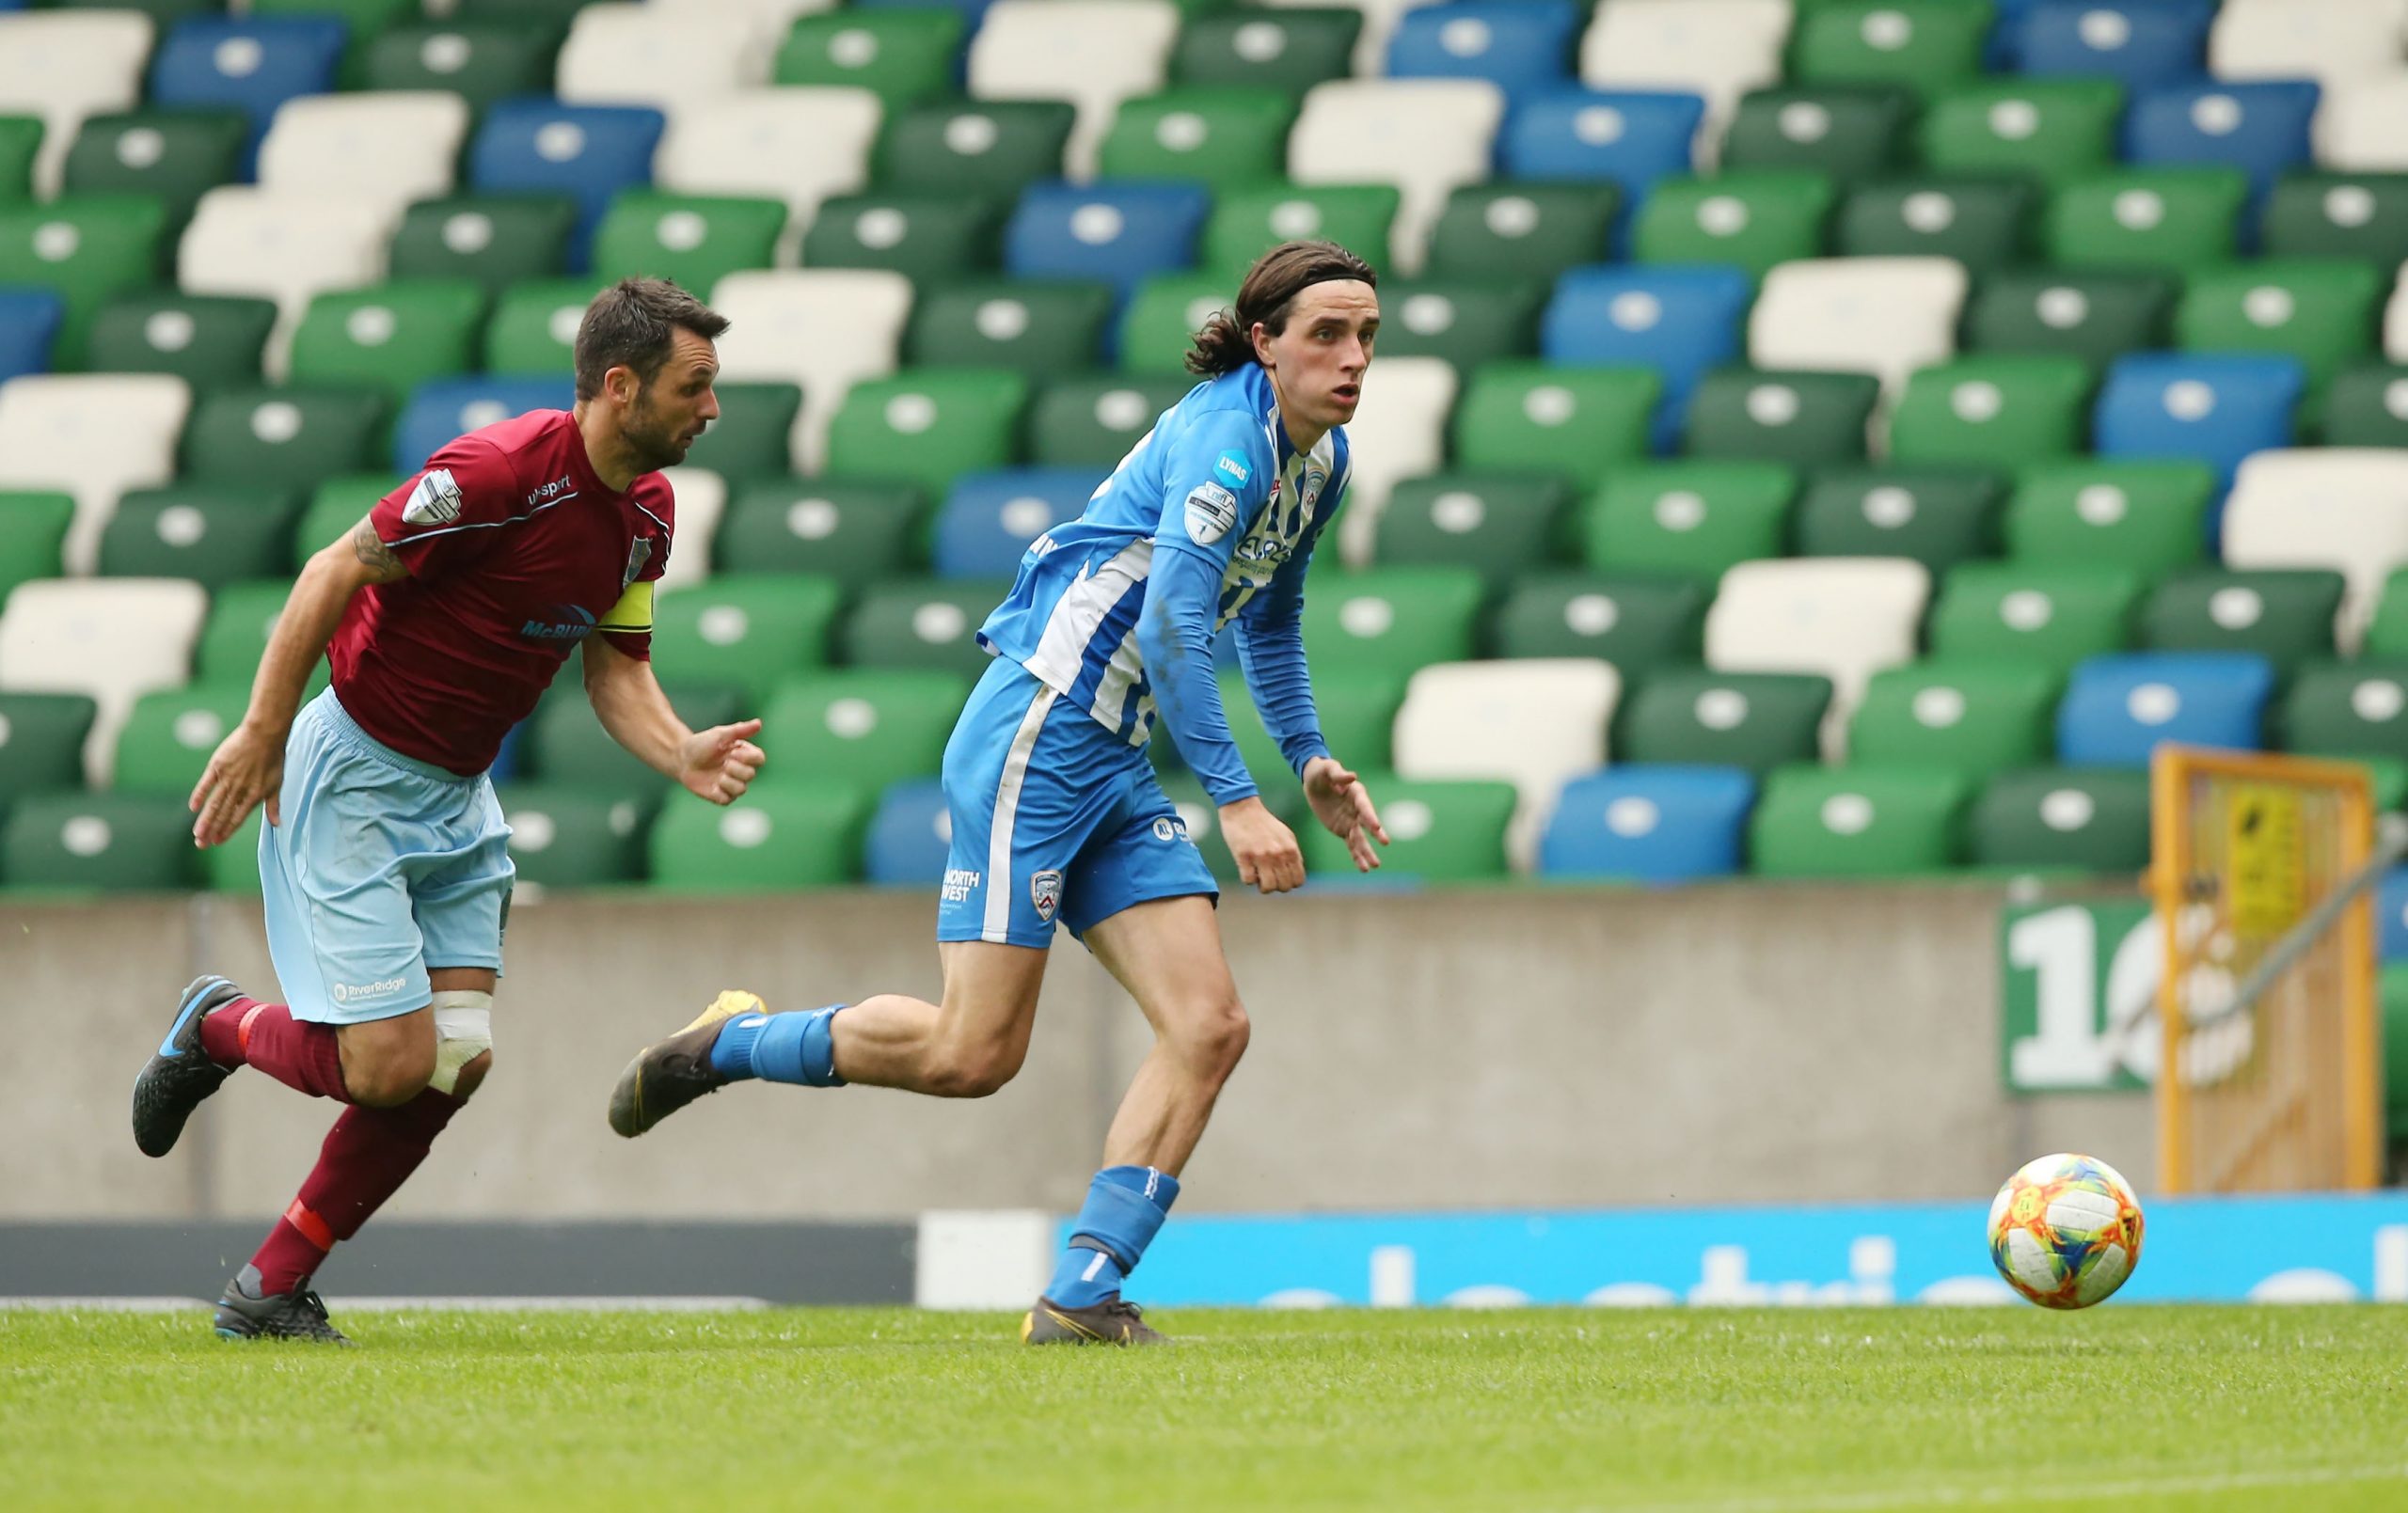 Glackin signs a new contract with Bannsiders